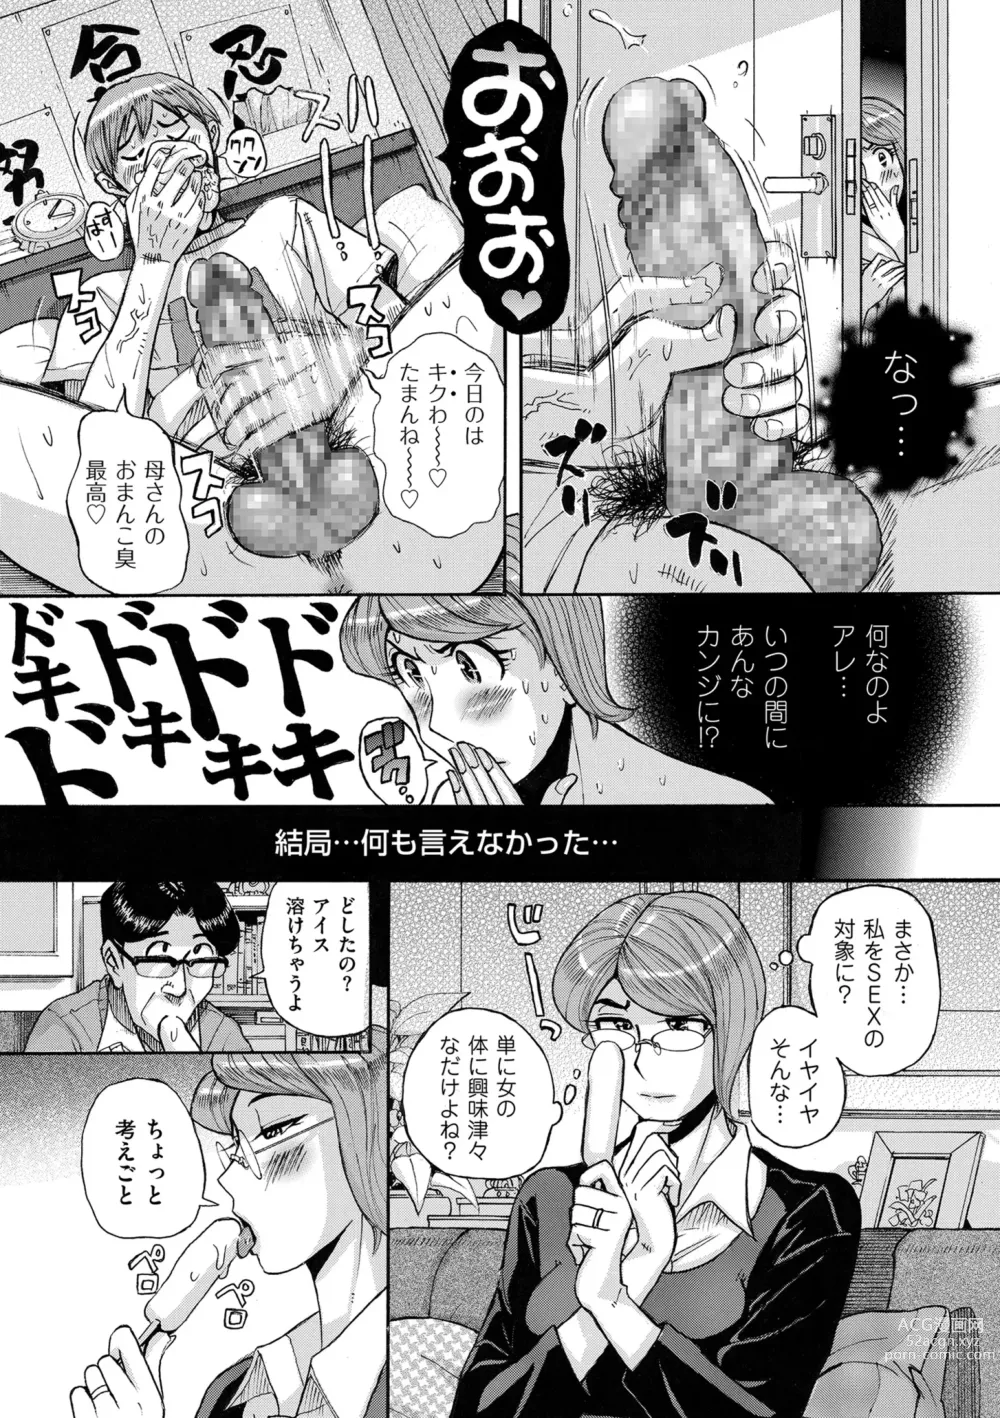 Page 11 of manga Mother’s Care Service How to ’Wincest’